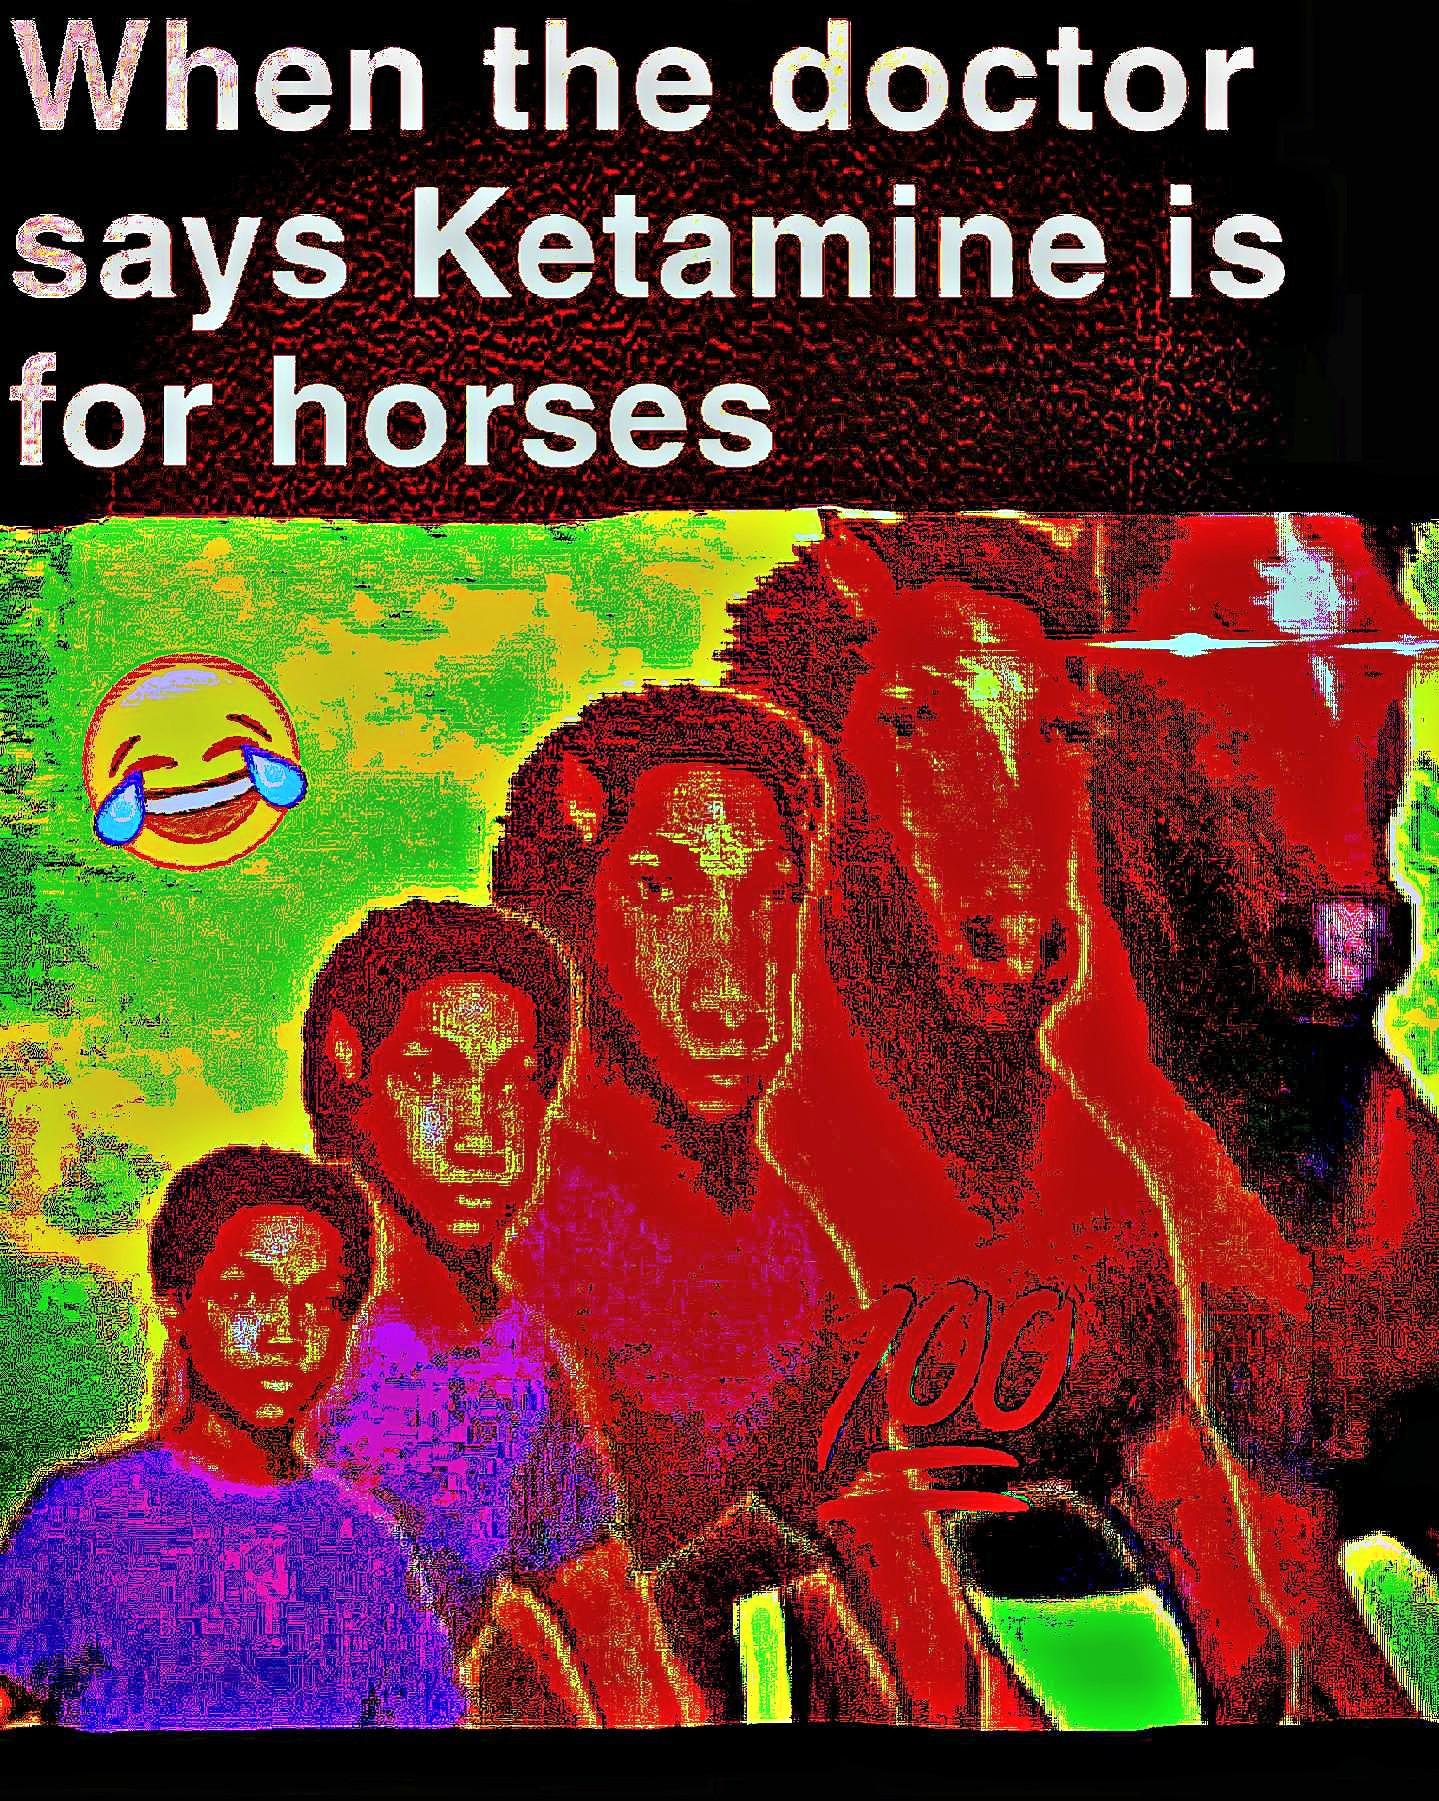 deep-fried deep-fried-memes deep-fried text: When the doctor says Ketamine is for horses 